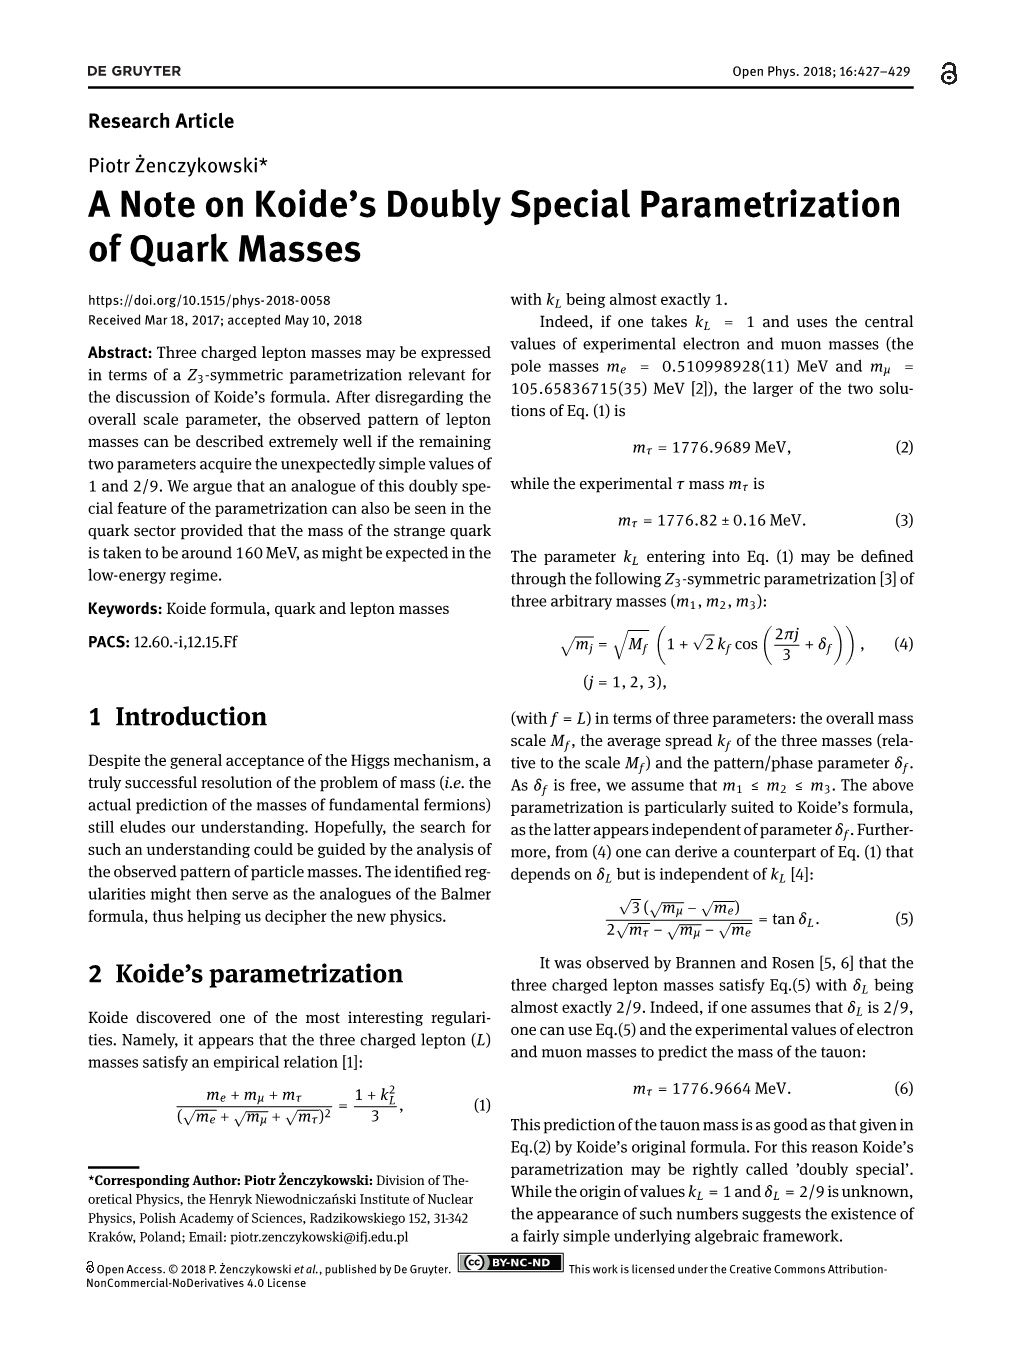 A Note on Koide's Doubly Special Parametrization of Quark Masses